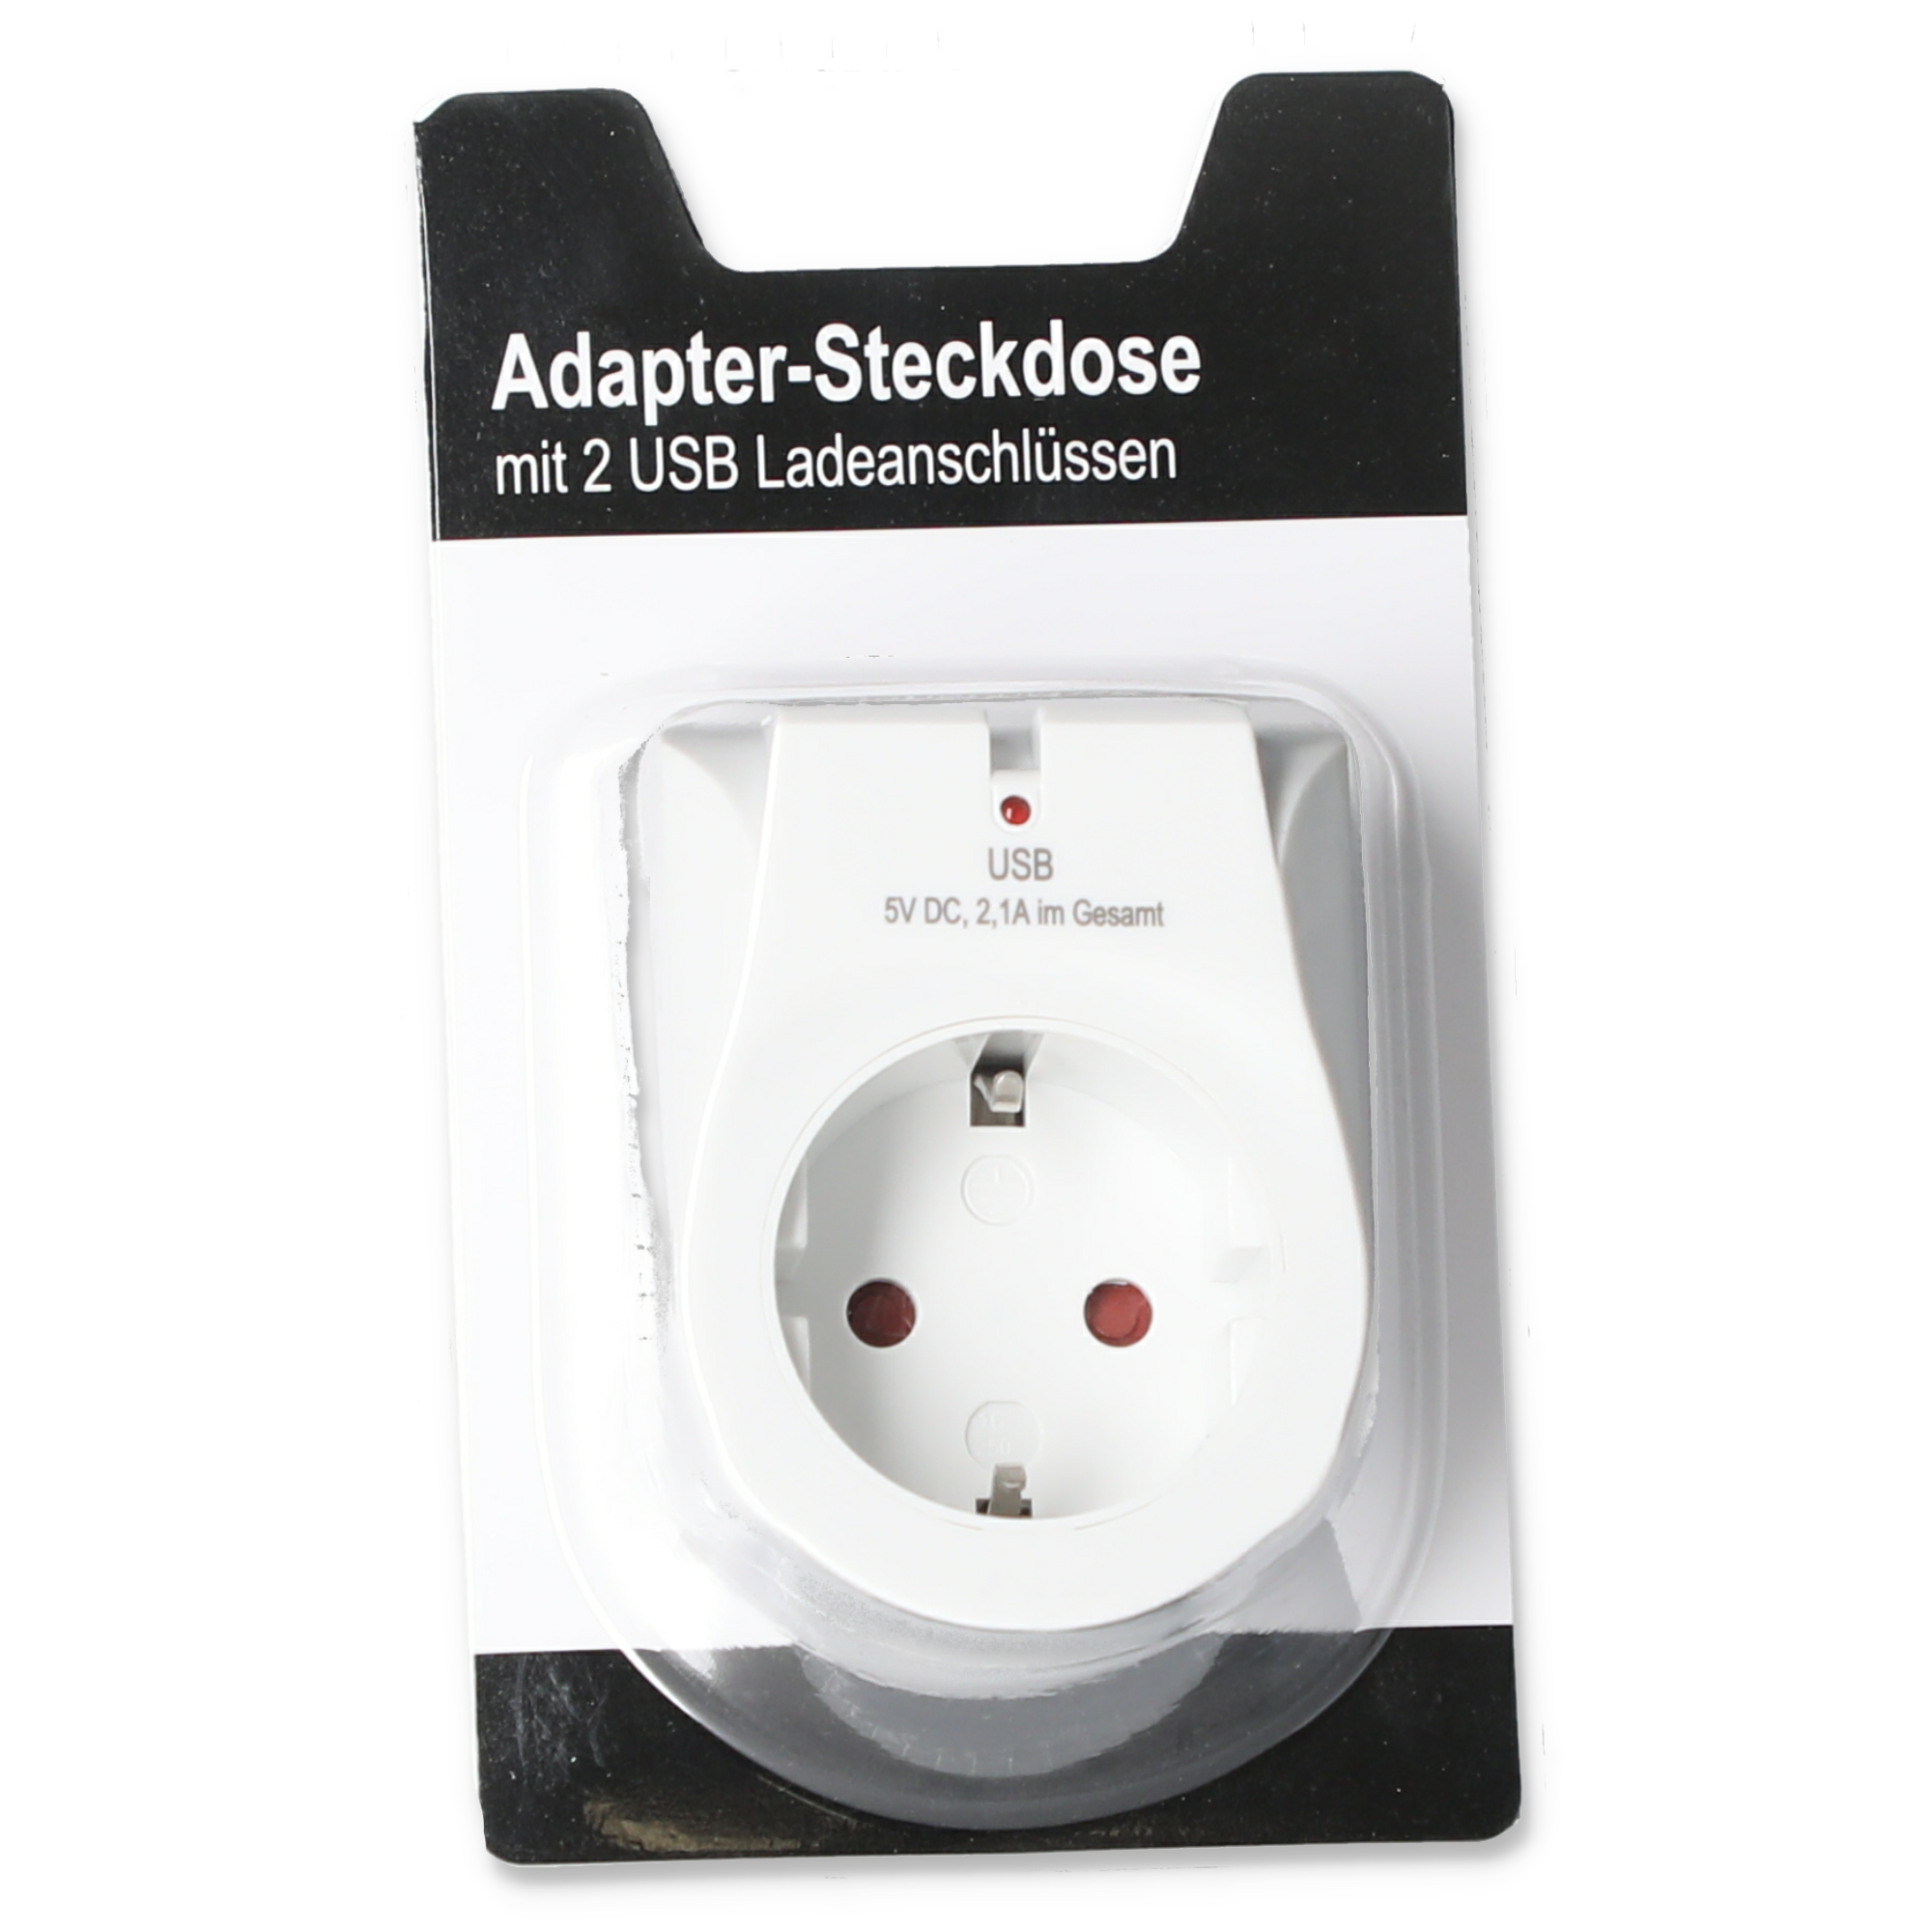 Steckdosenadapter mit USB-Anschluss weiß + product picture